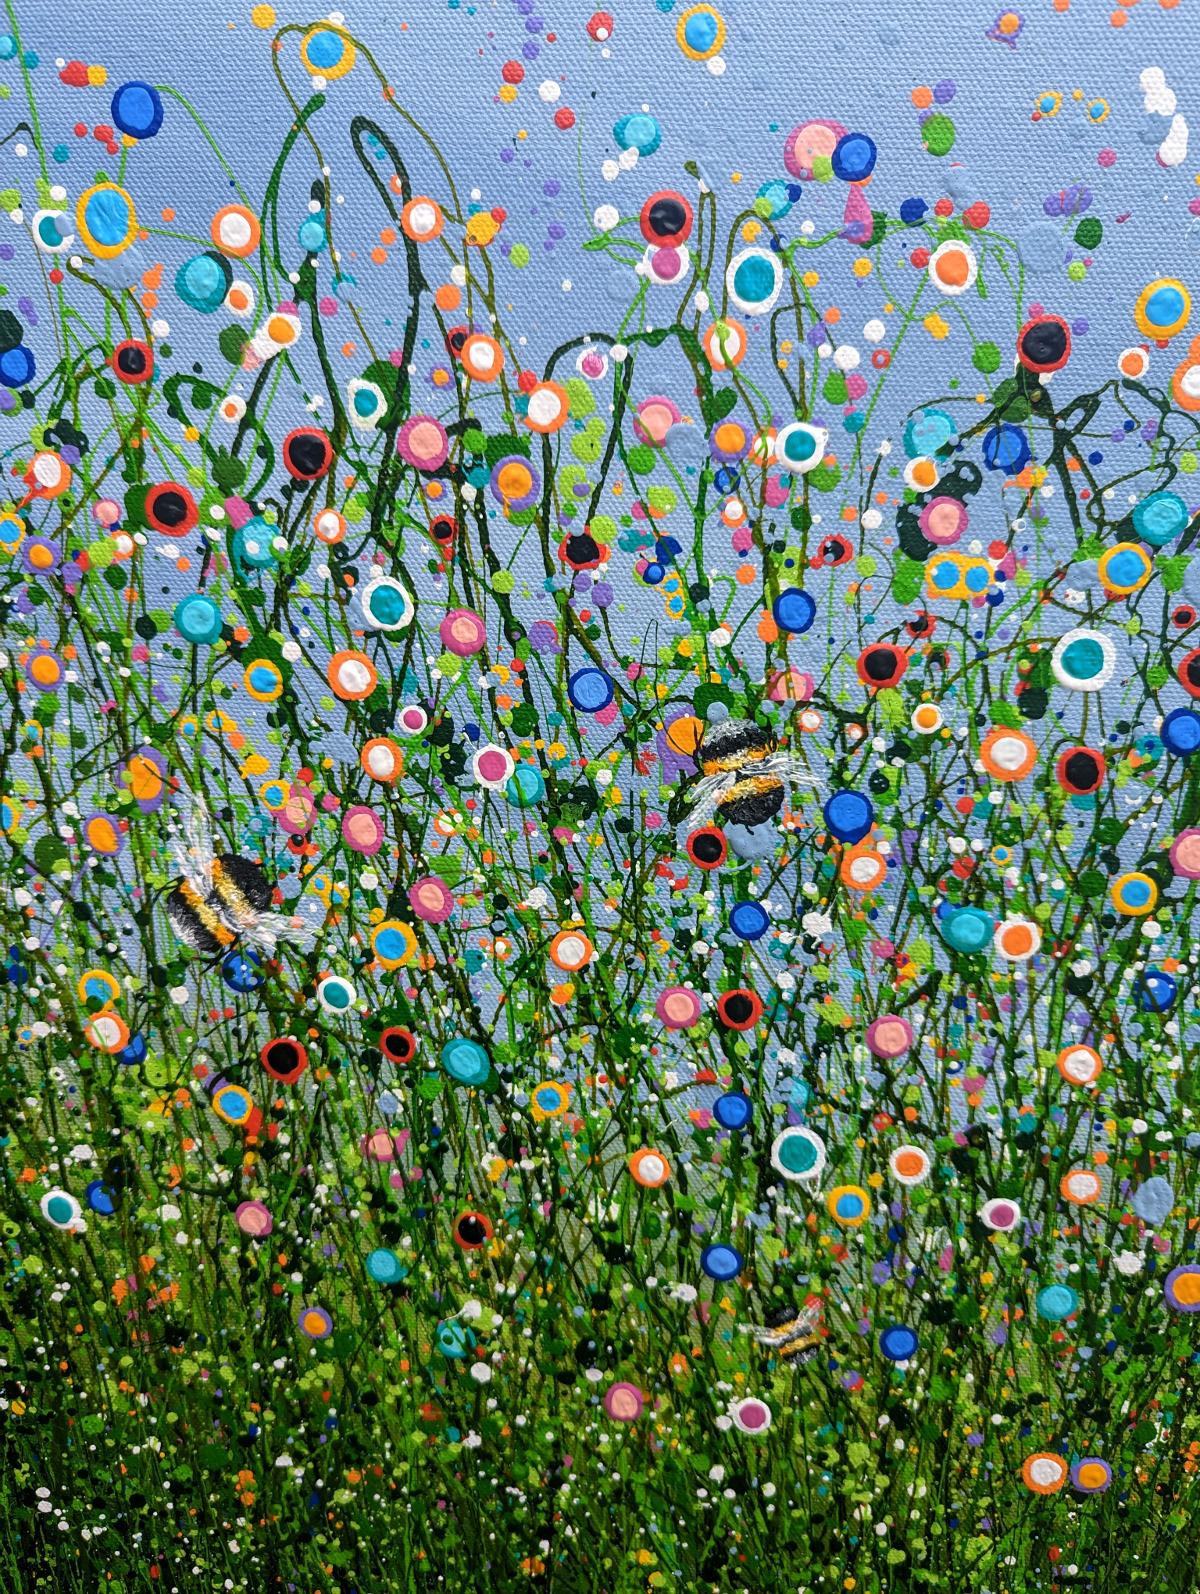 Bumbling Chaos #2, floral art, meadow art, original art, affordable art - Gray Landscape Painting by Lucy Moore